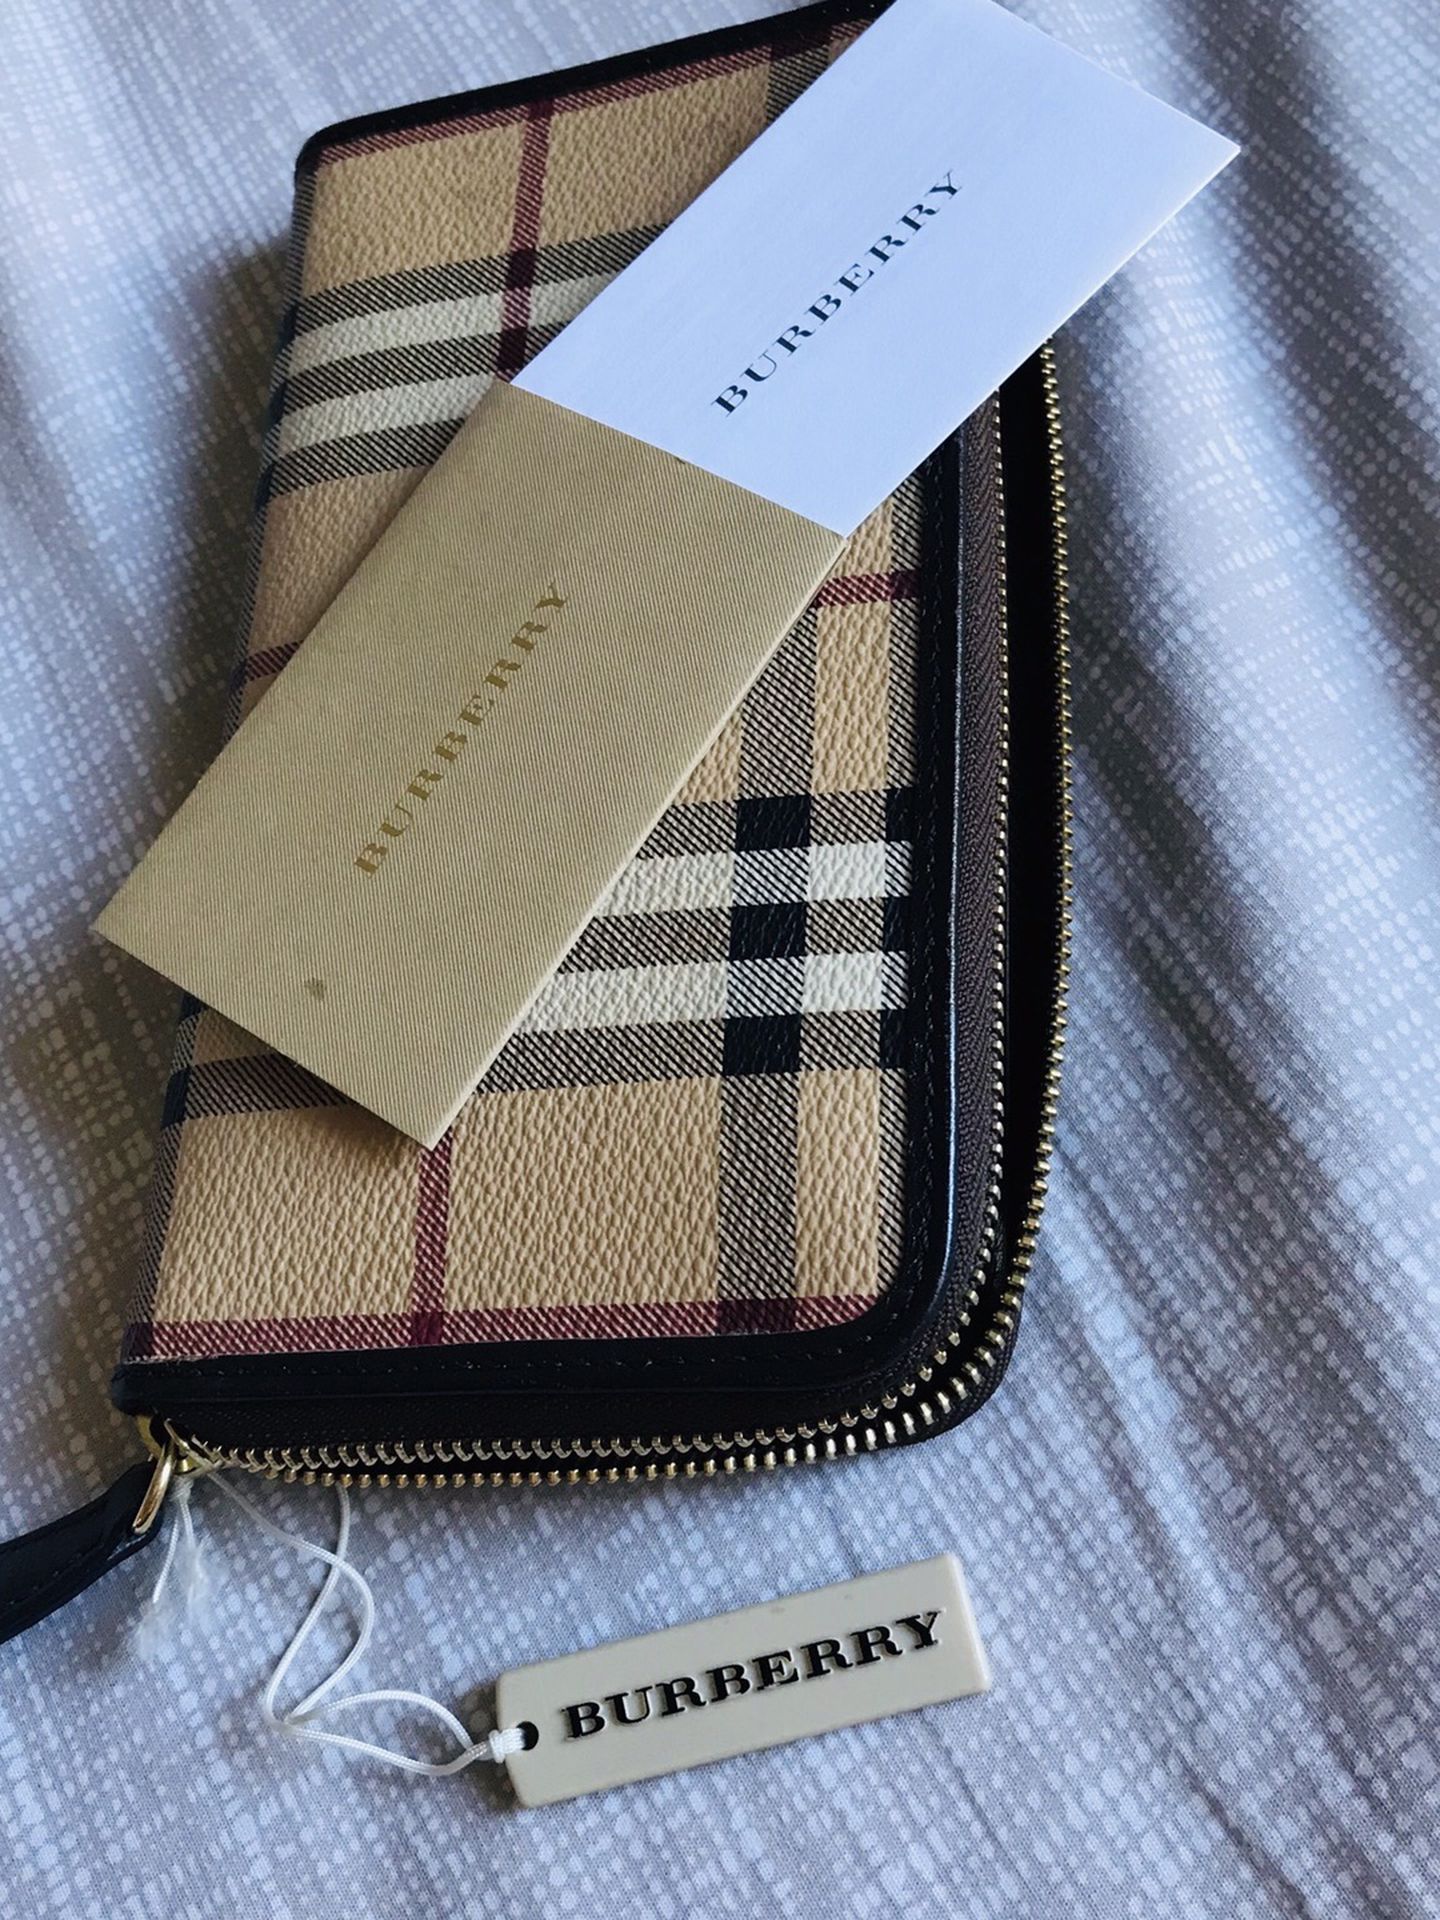 Burberry Second Love, Mint Condition And Lots Of Space For Everything